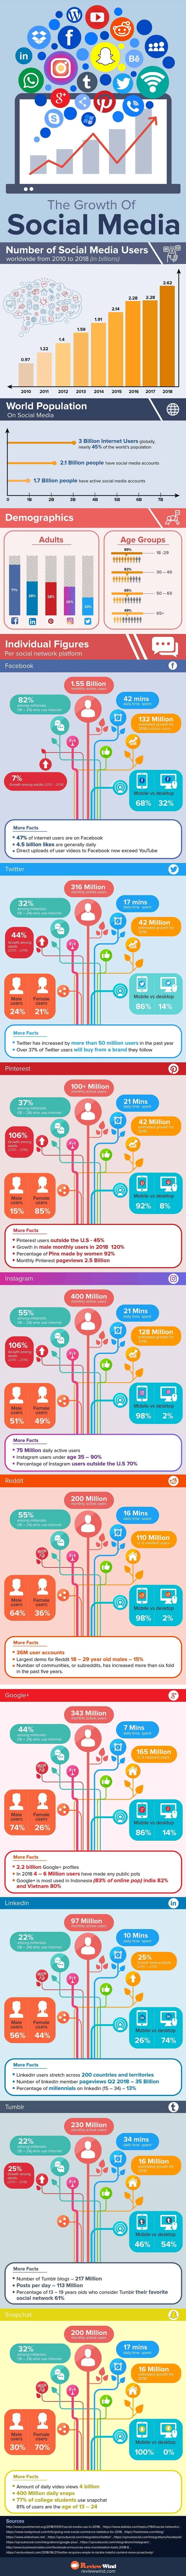 The Growth of Social Media (Infographic)